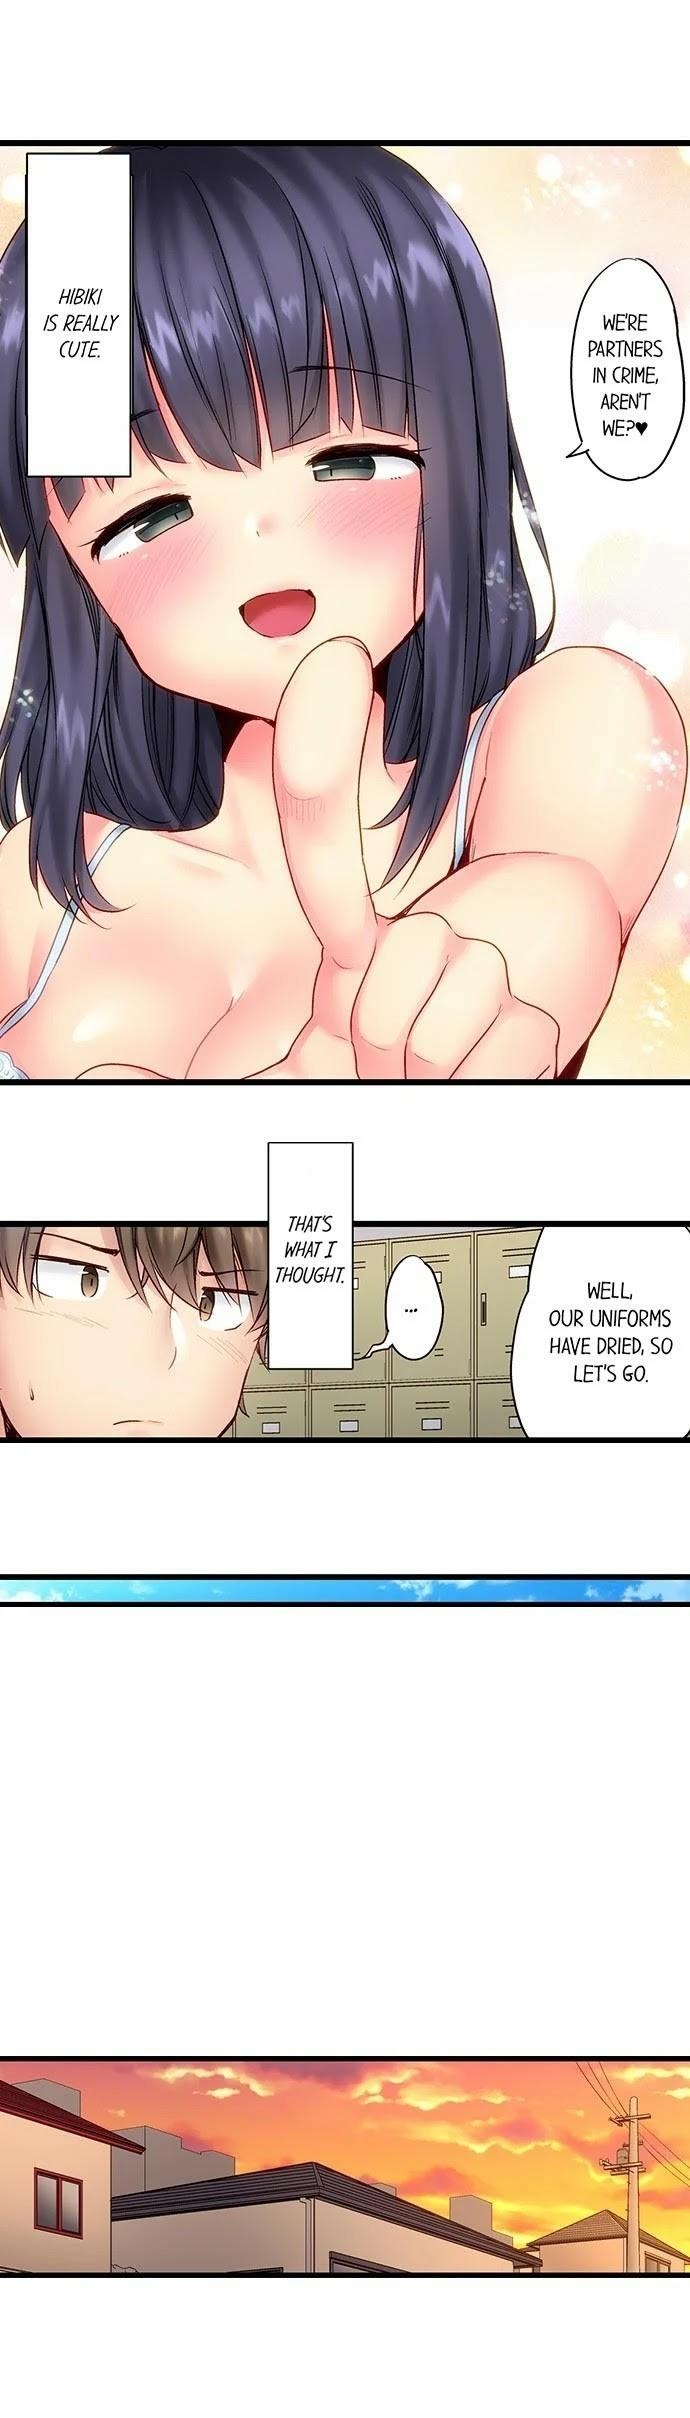 [Yuuki HB] "Hypnotized" Sex with My Brother Ch.21/? [English] [Ongoing] 110